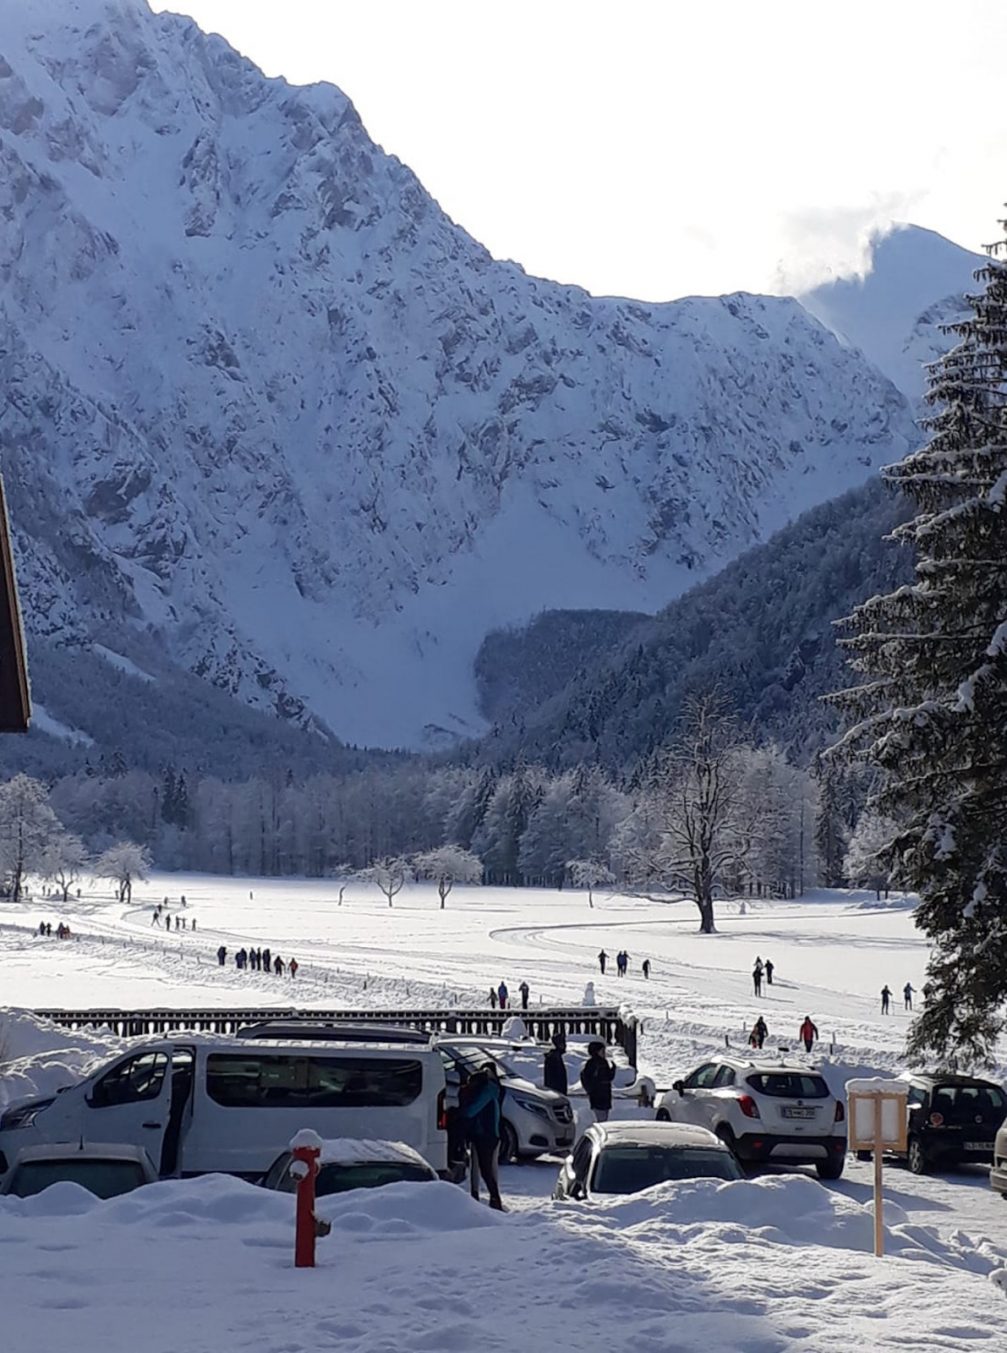 Local people visiting Logarska Valley in Slovenia covered in snow in winter